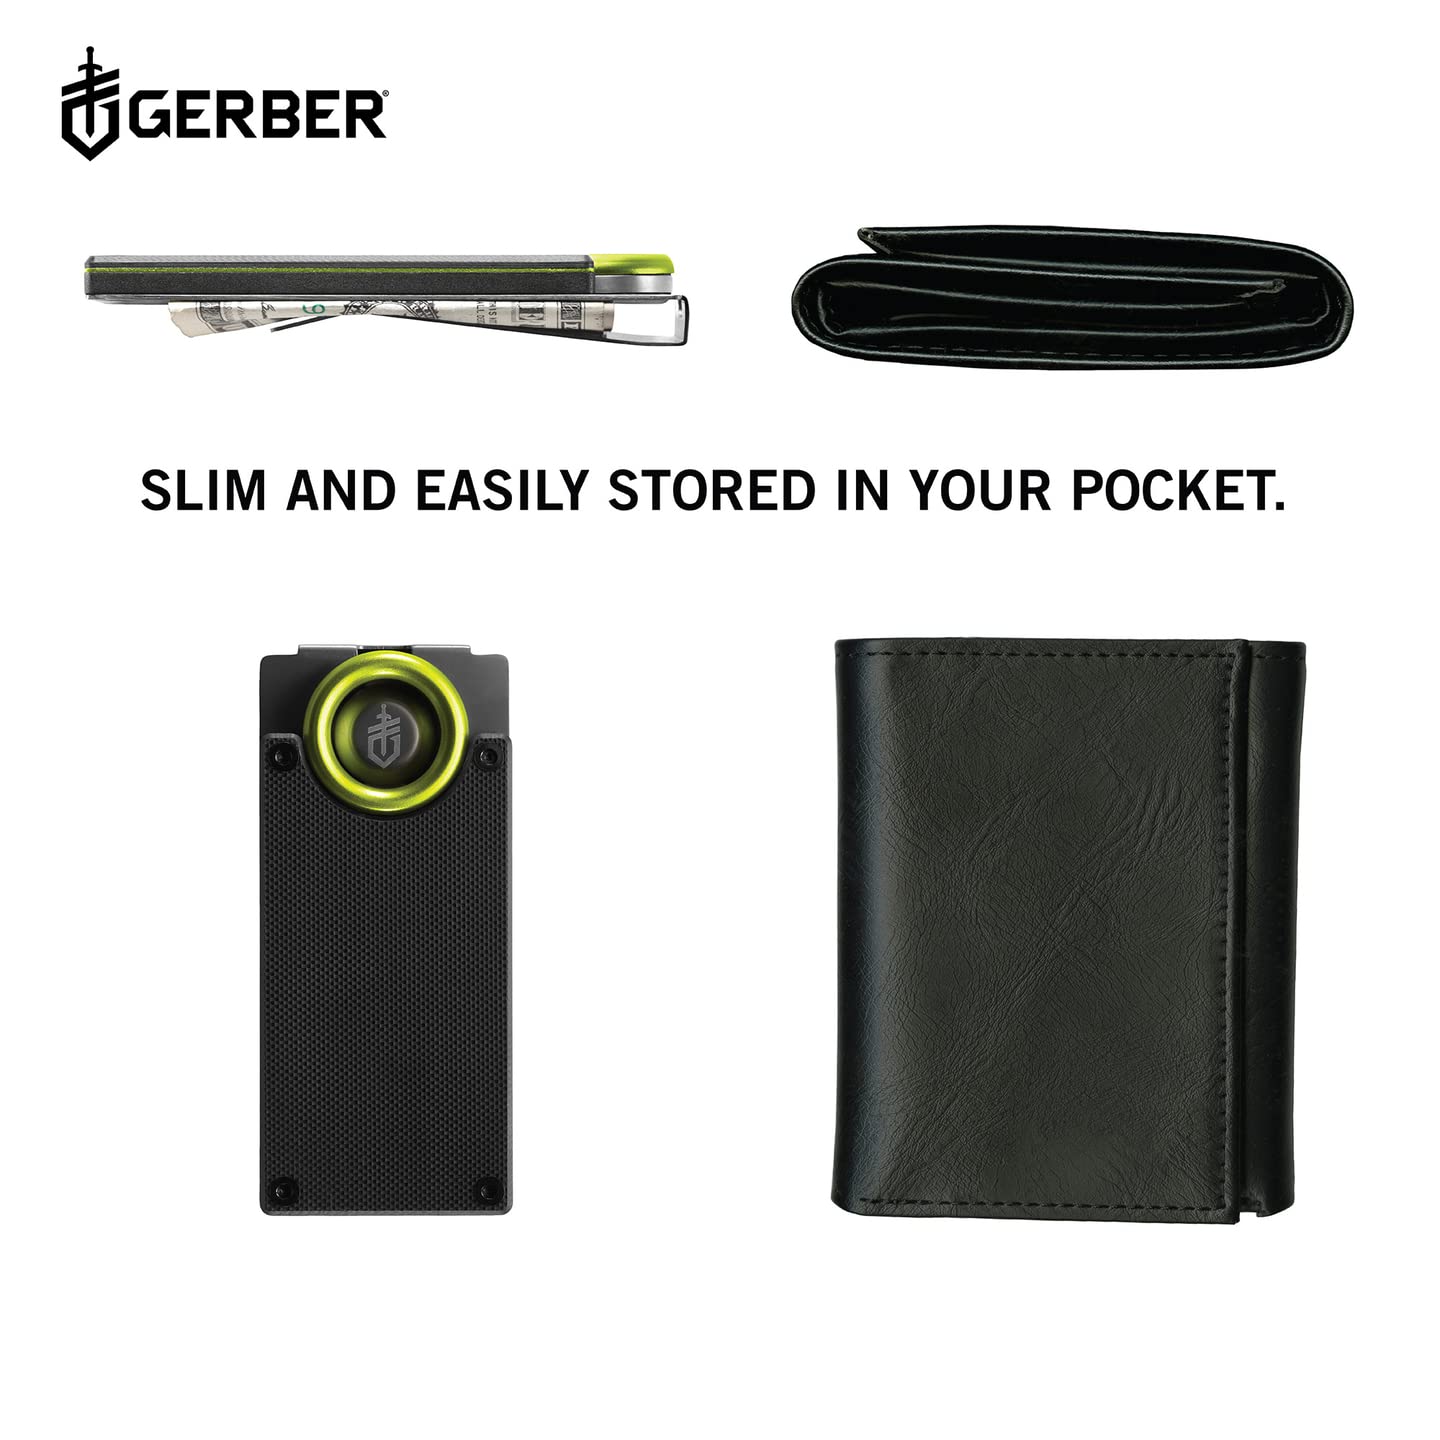 Gerber Gear 31-002521N GDC Pocket Knife Money Clip, GDC Fixed Blade Knife and Case, EDC Gear, Stainless Steel,Grey